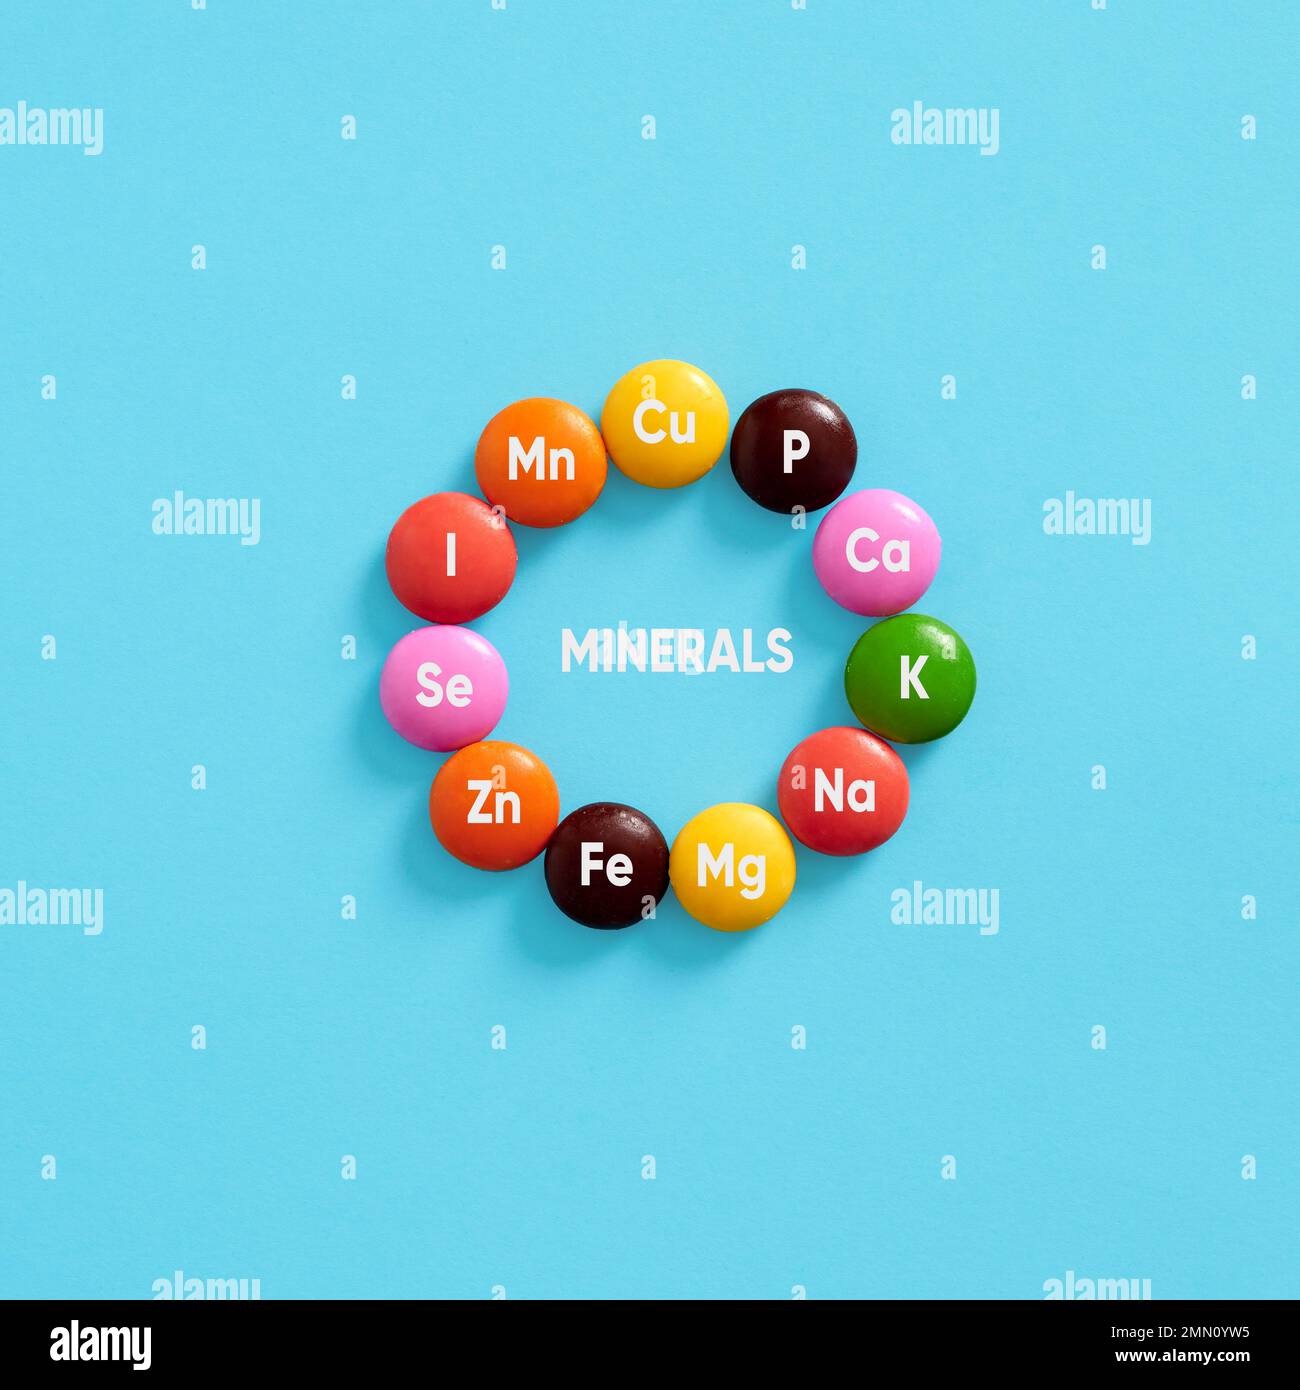 Nutritional mineral supplements. Health care. Minerals, body health and dieting. Essential Mineral symbols for body care on colorful pills. Stock Photo